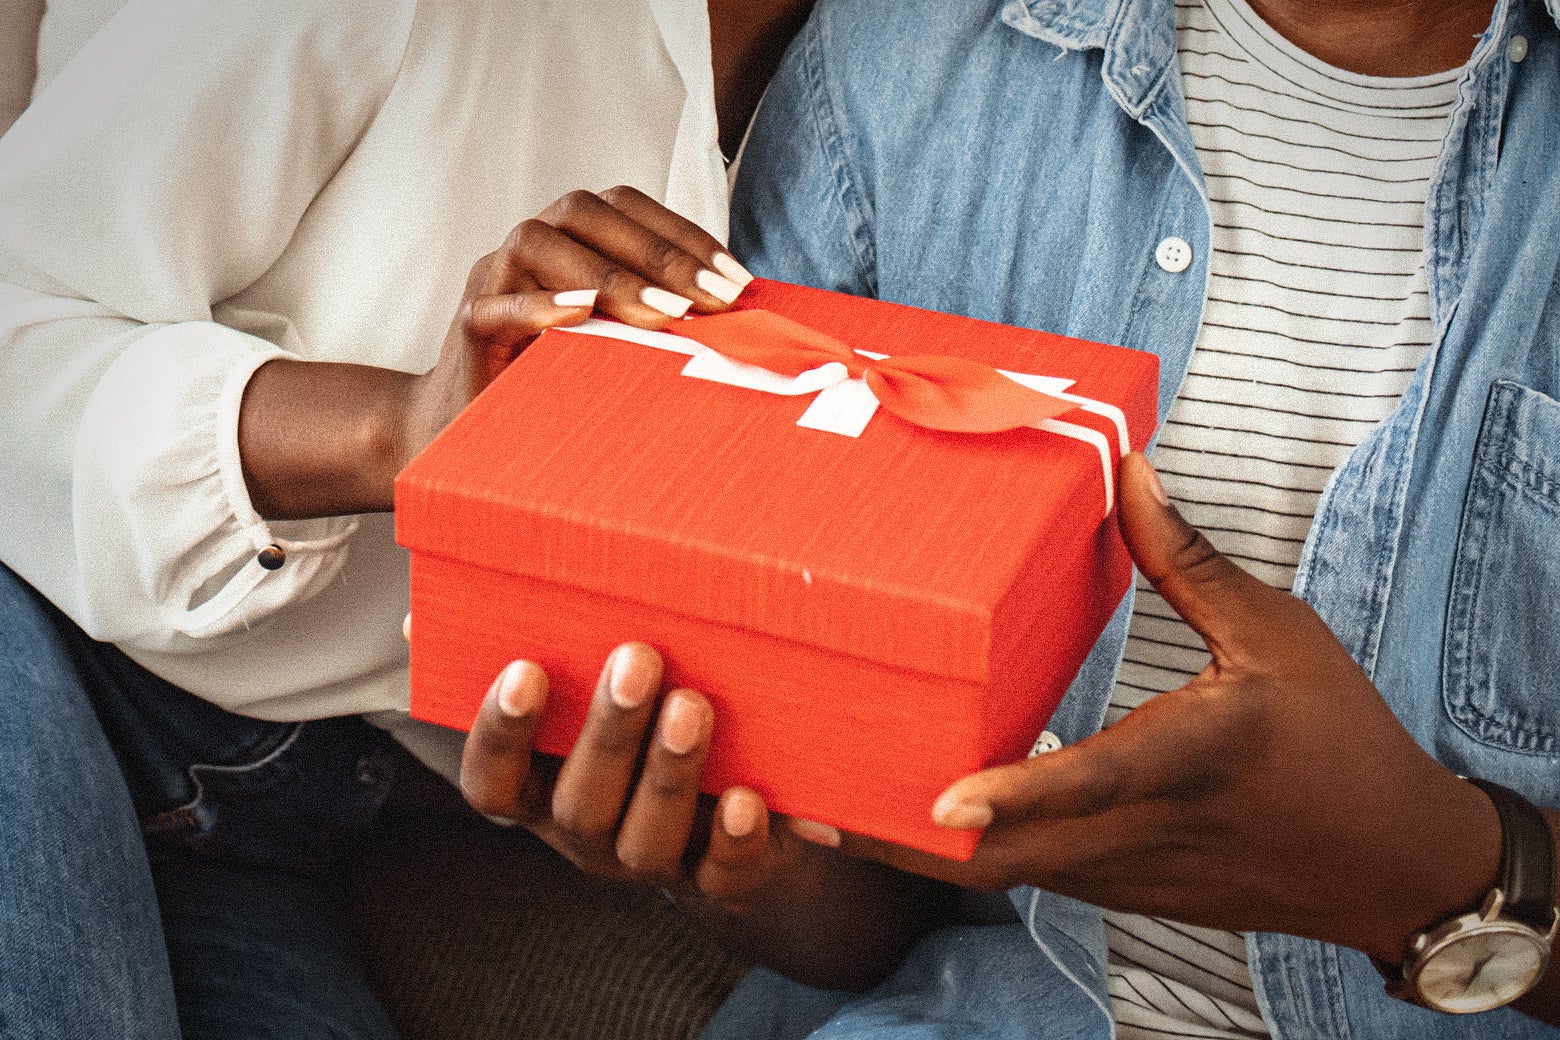 Holiday etiquette for gift-giving this season